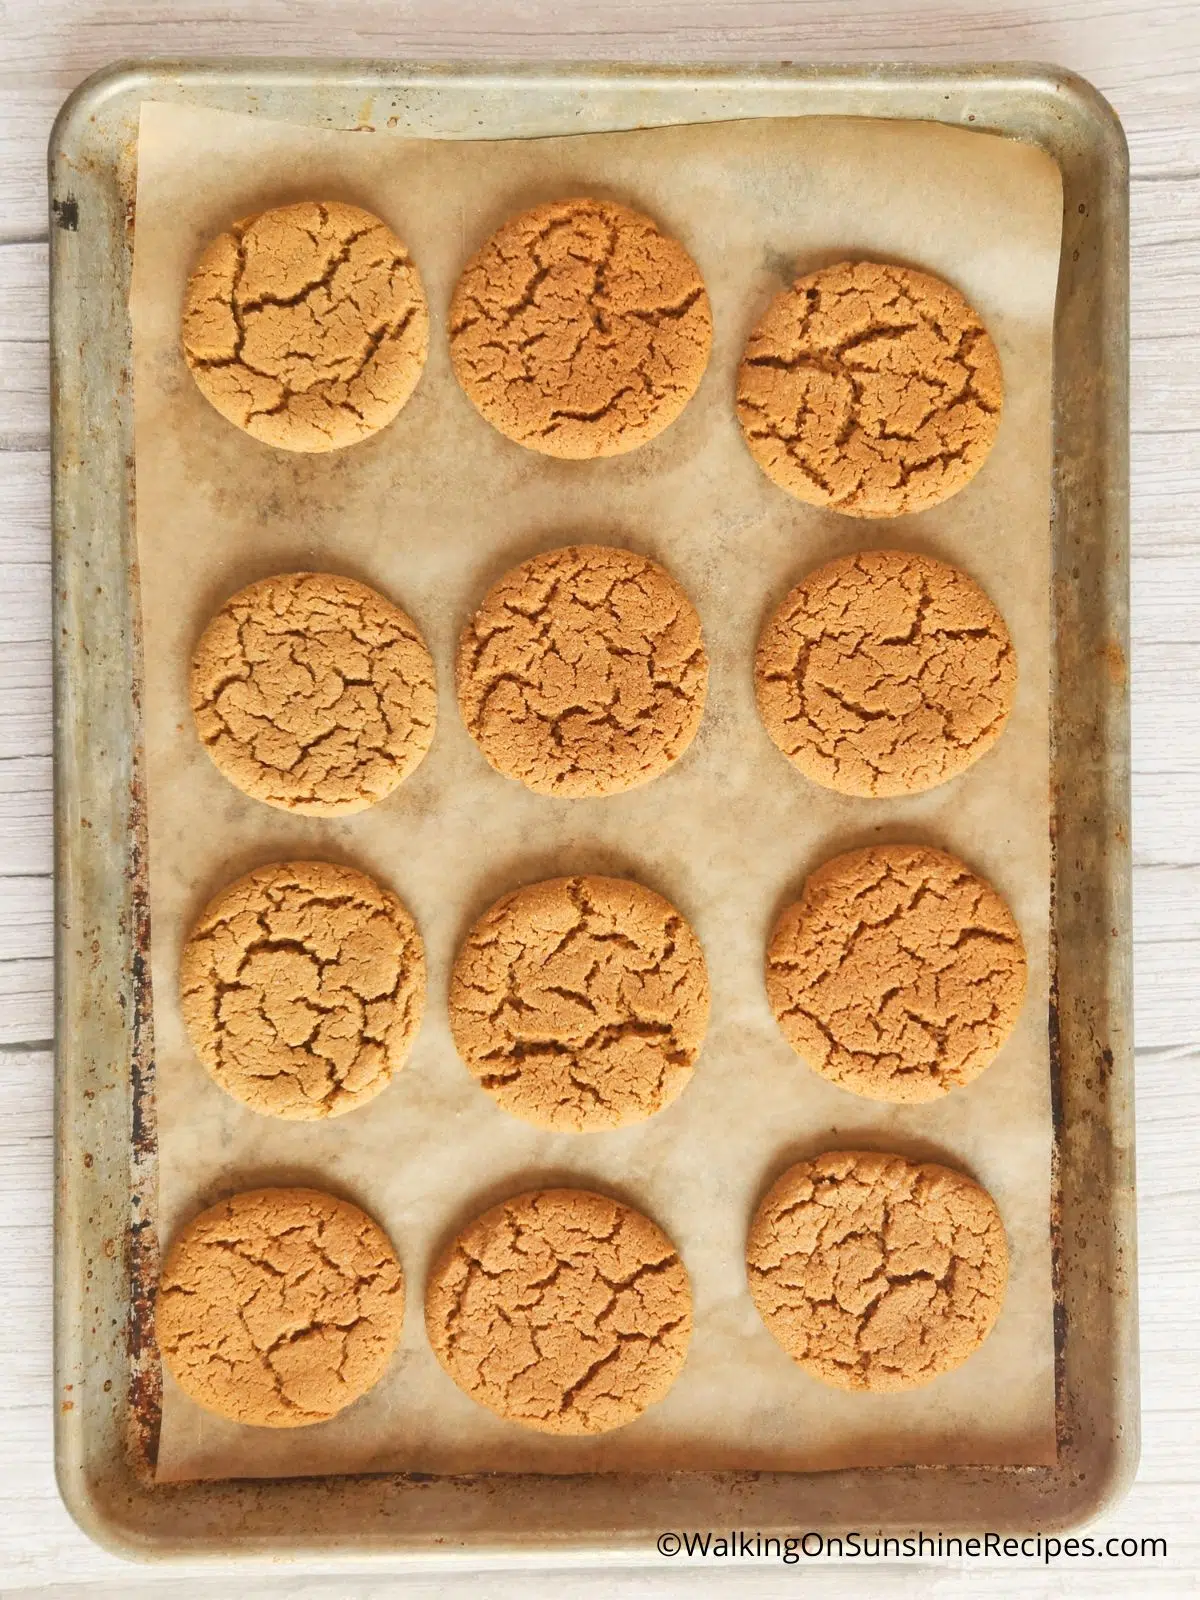 Baked Crispy Gingerbread cookies on baking tray.